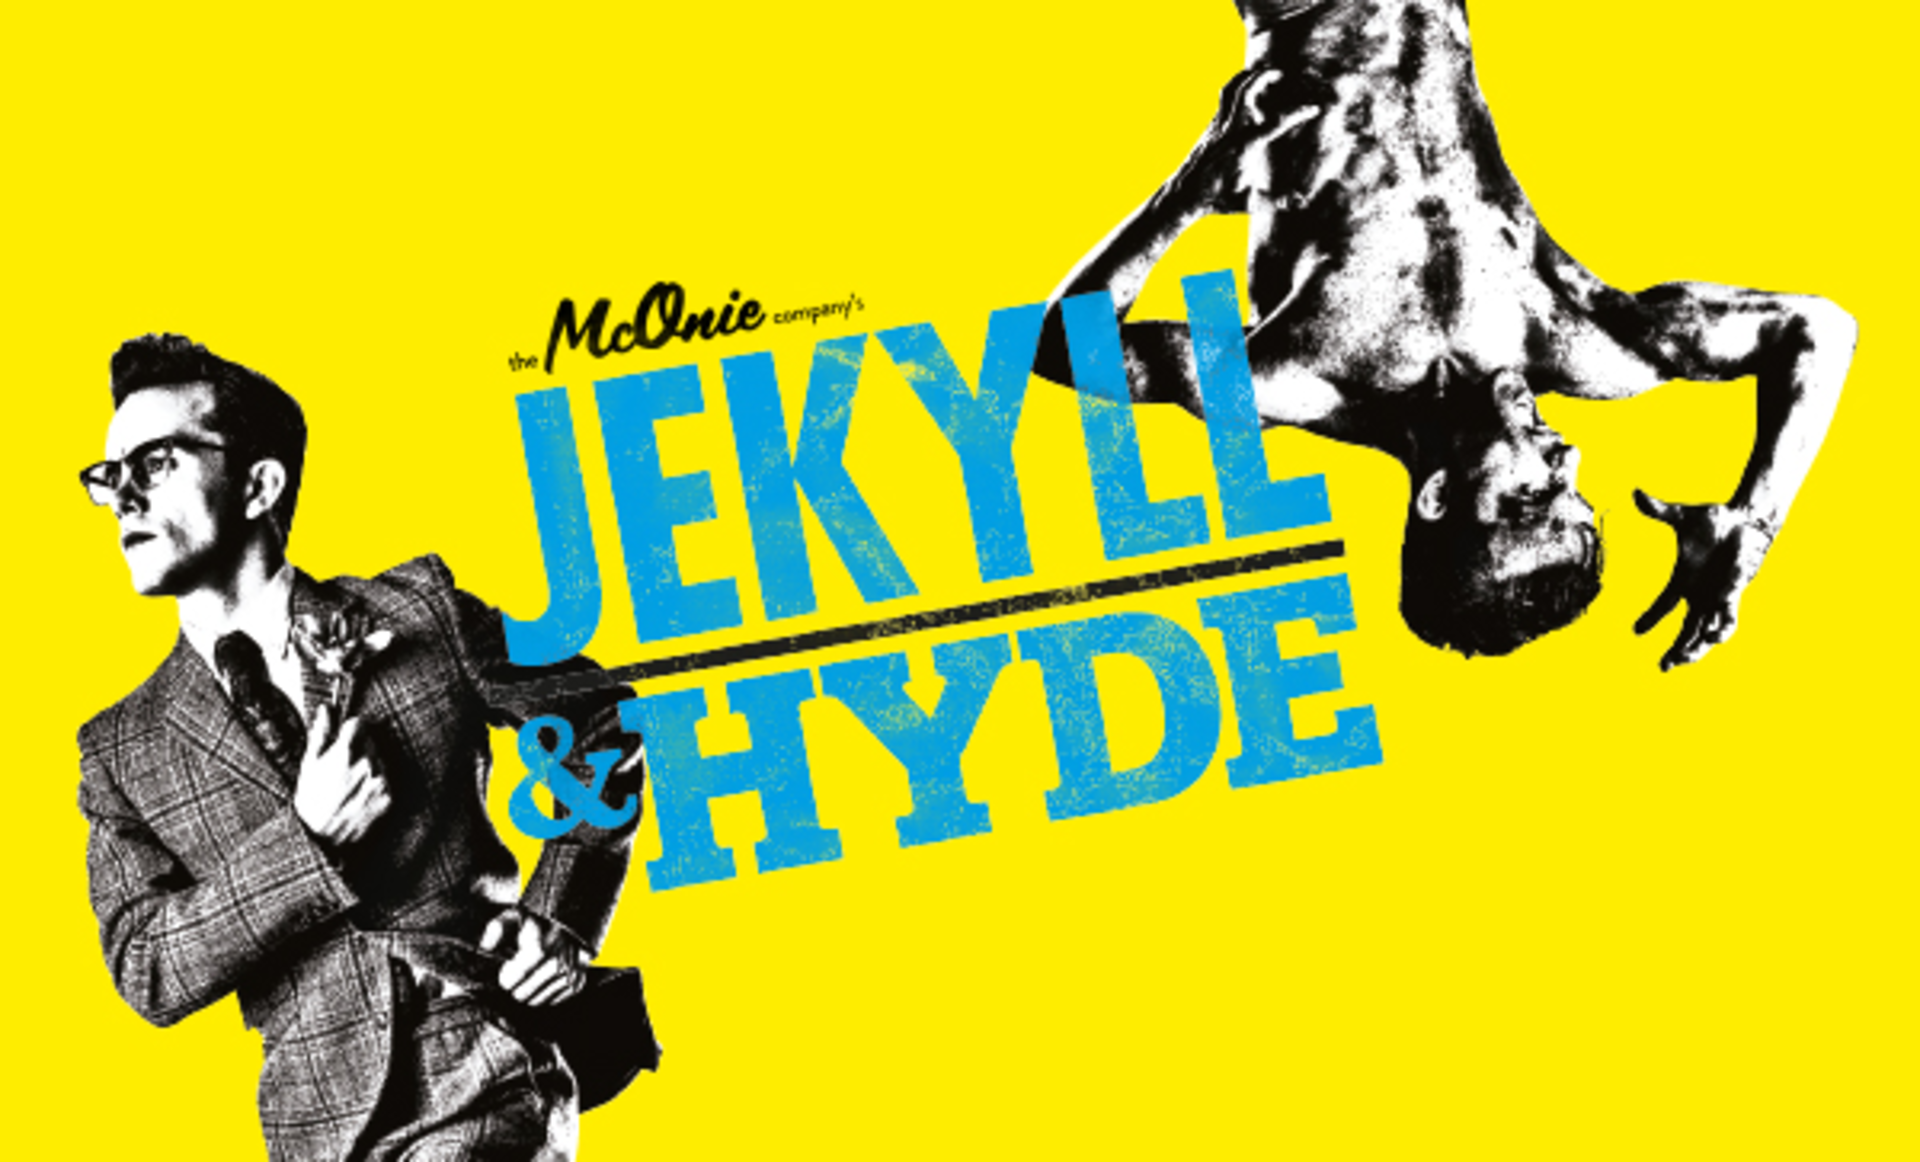 The McOnie Company’s Jekyll & Hyde - pair of top price rickets at the Old Vic 20th - 28th May 2016